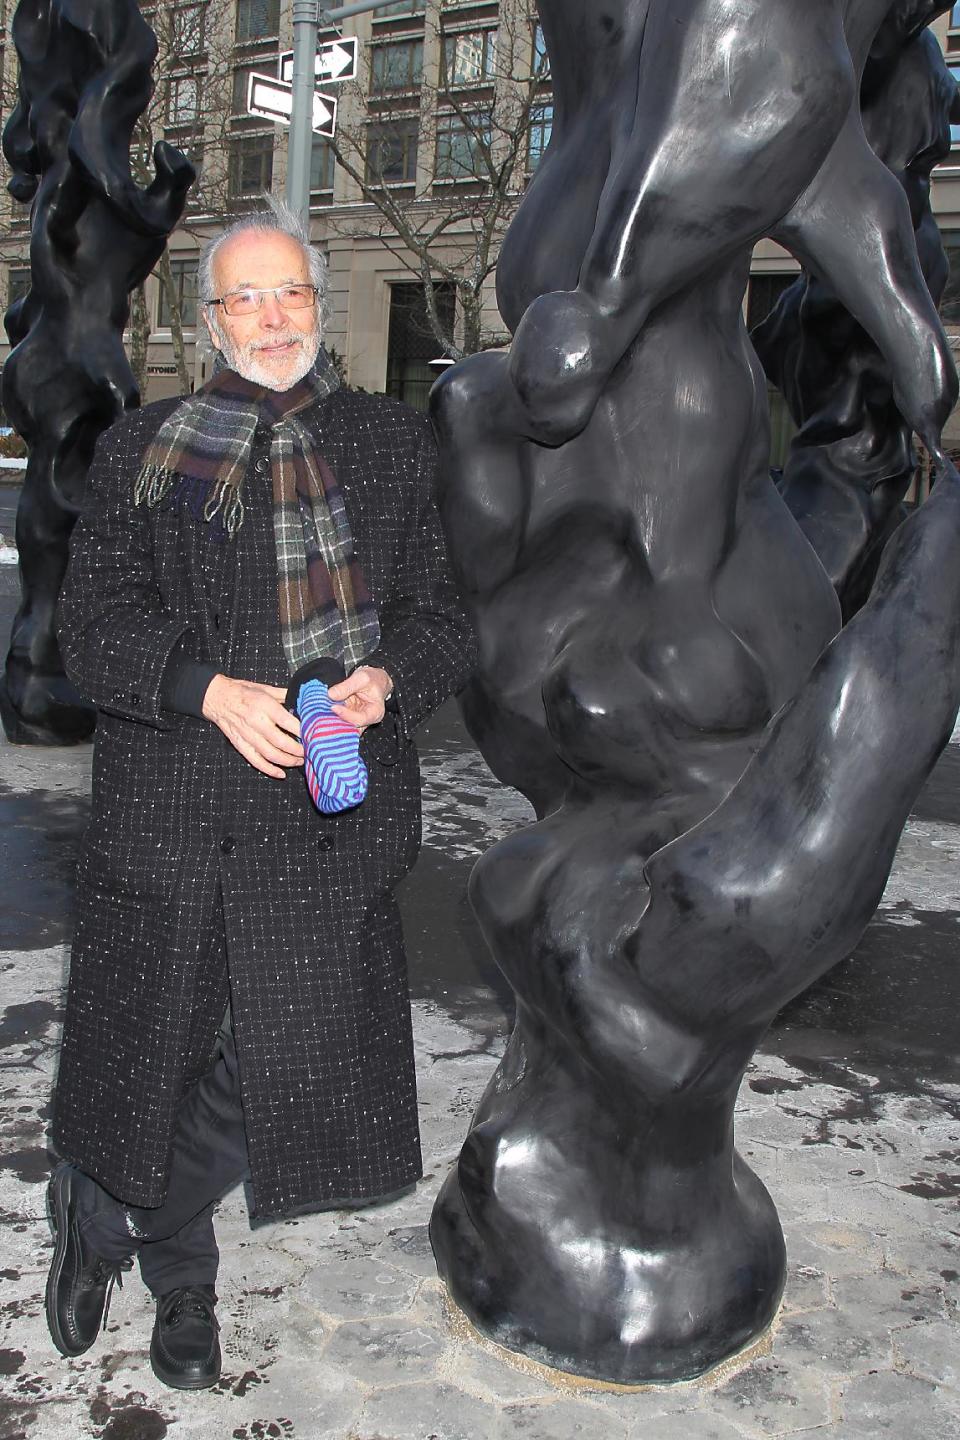 This image released by Starpix shows musician-artist Herb Alpert standing next to one of three black bronze totem sculptures on display at Dante Park on West 64th Street and Broadway, Thursday, Jan 23, 2014 in New York. The sculptures will be on display until April 15. (AP Photo/Starpix, Dave Allocca)